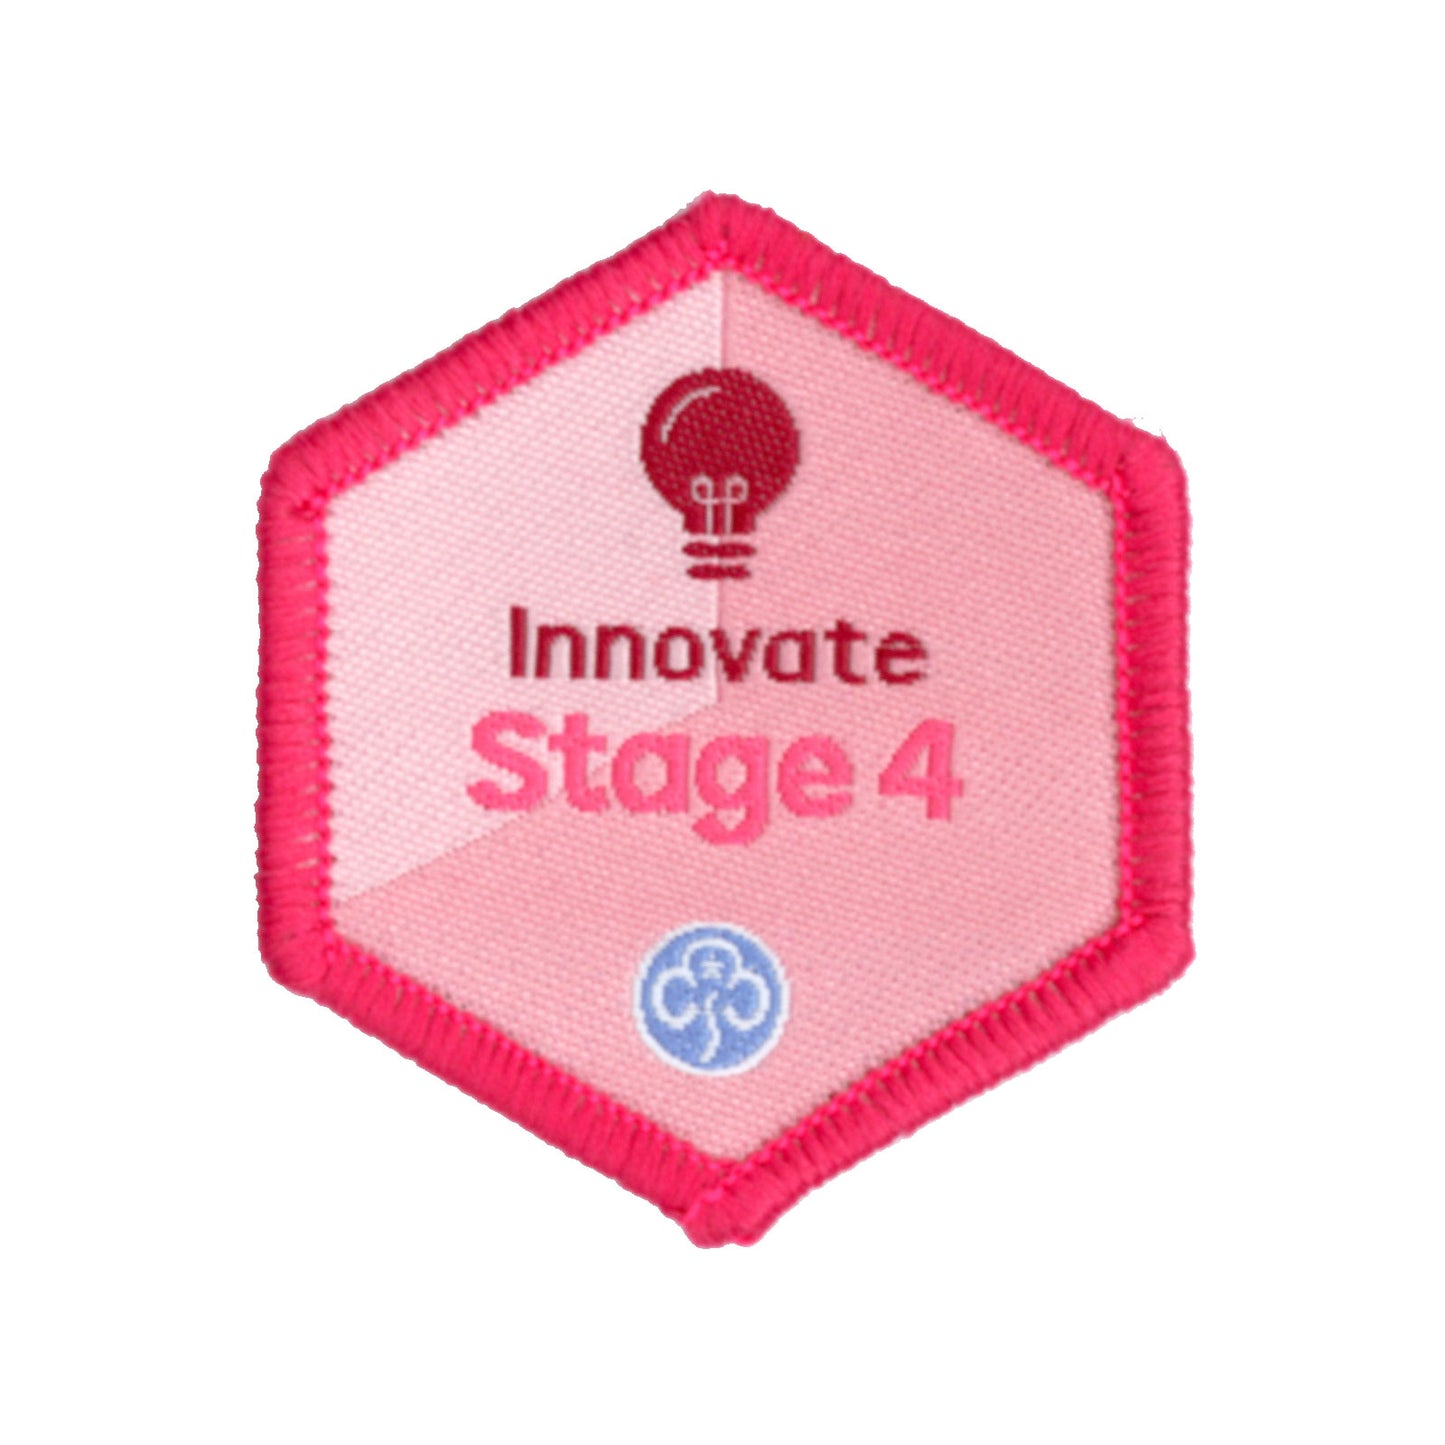 Skills Builder -  Express Myself - Innovate Stage 4 Woven Badge